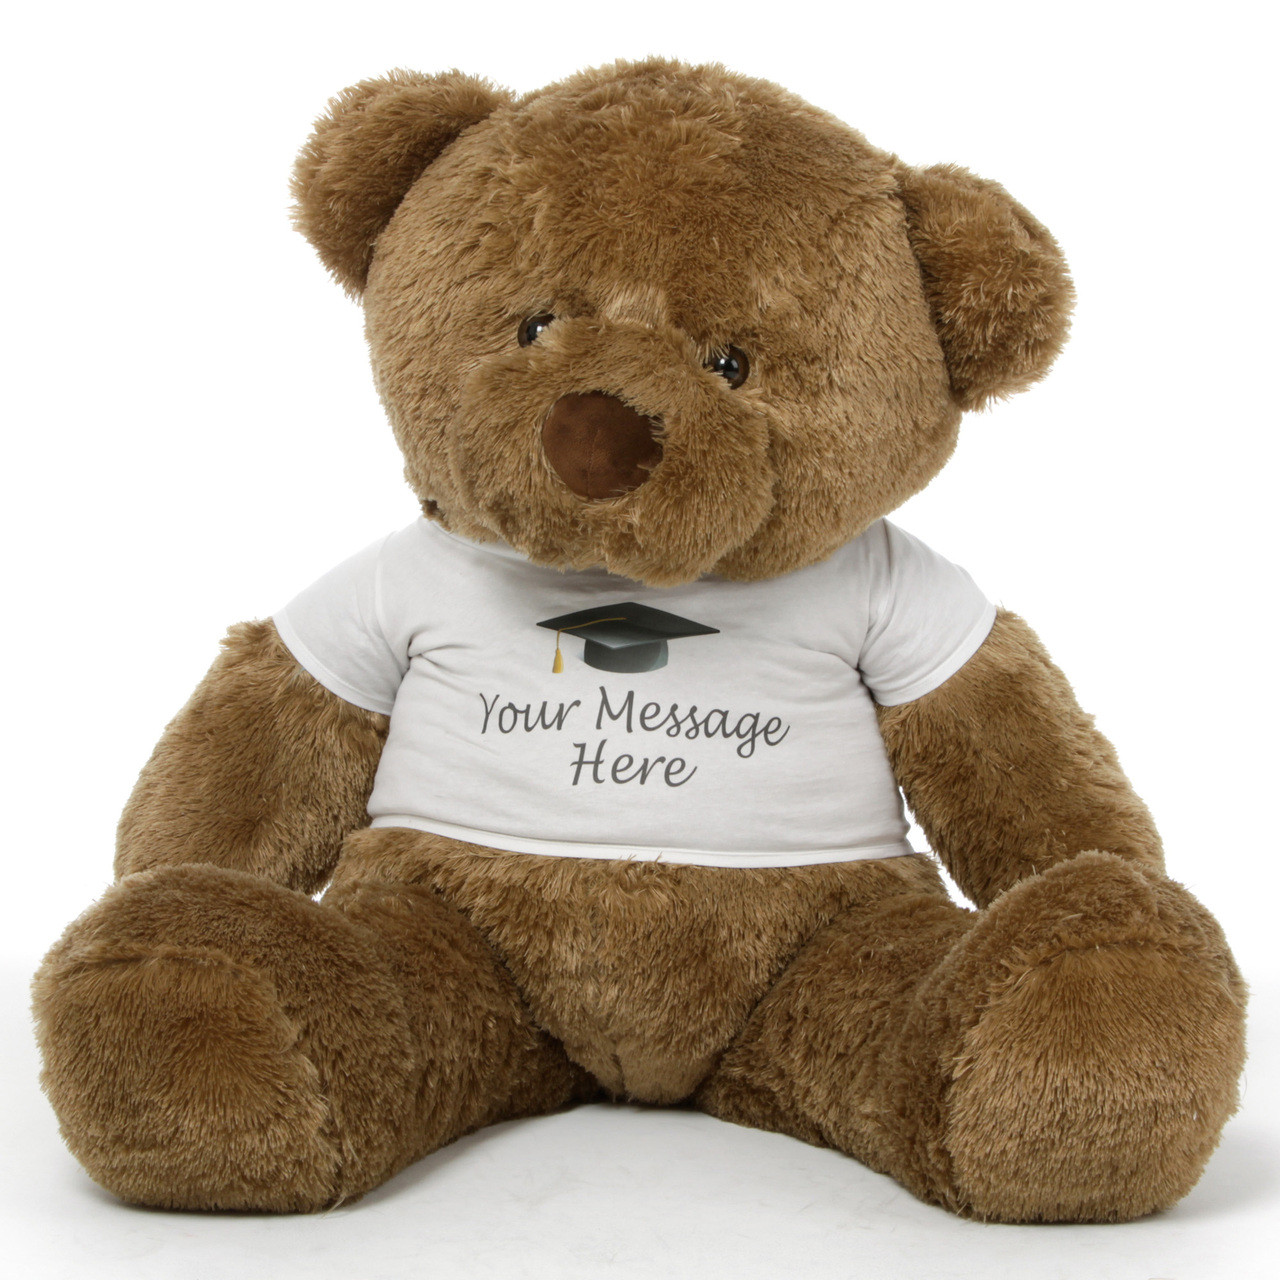 Huge 4ft Personalized Graduation Teddy Bear Gifts in 6 Color Choices